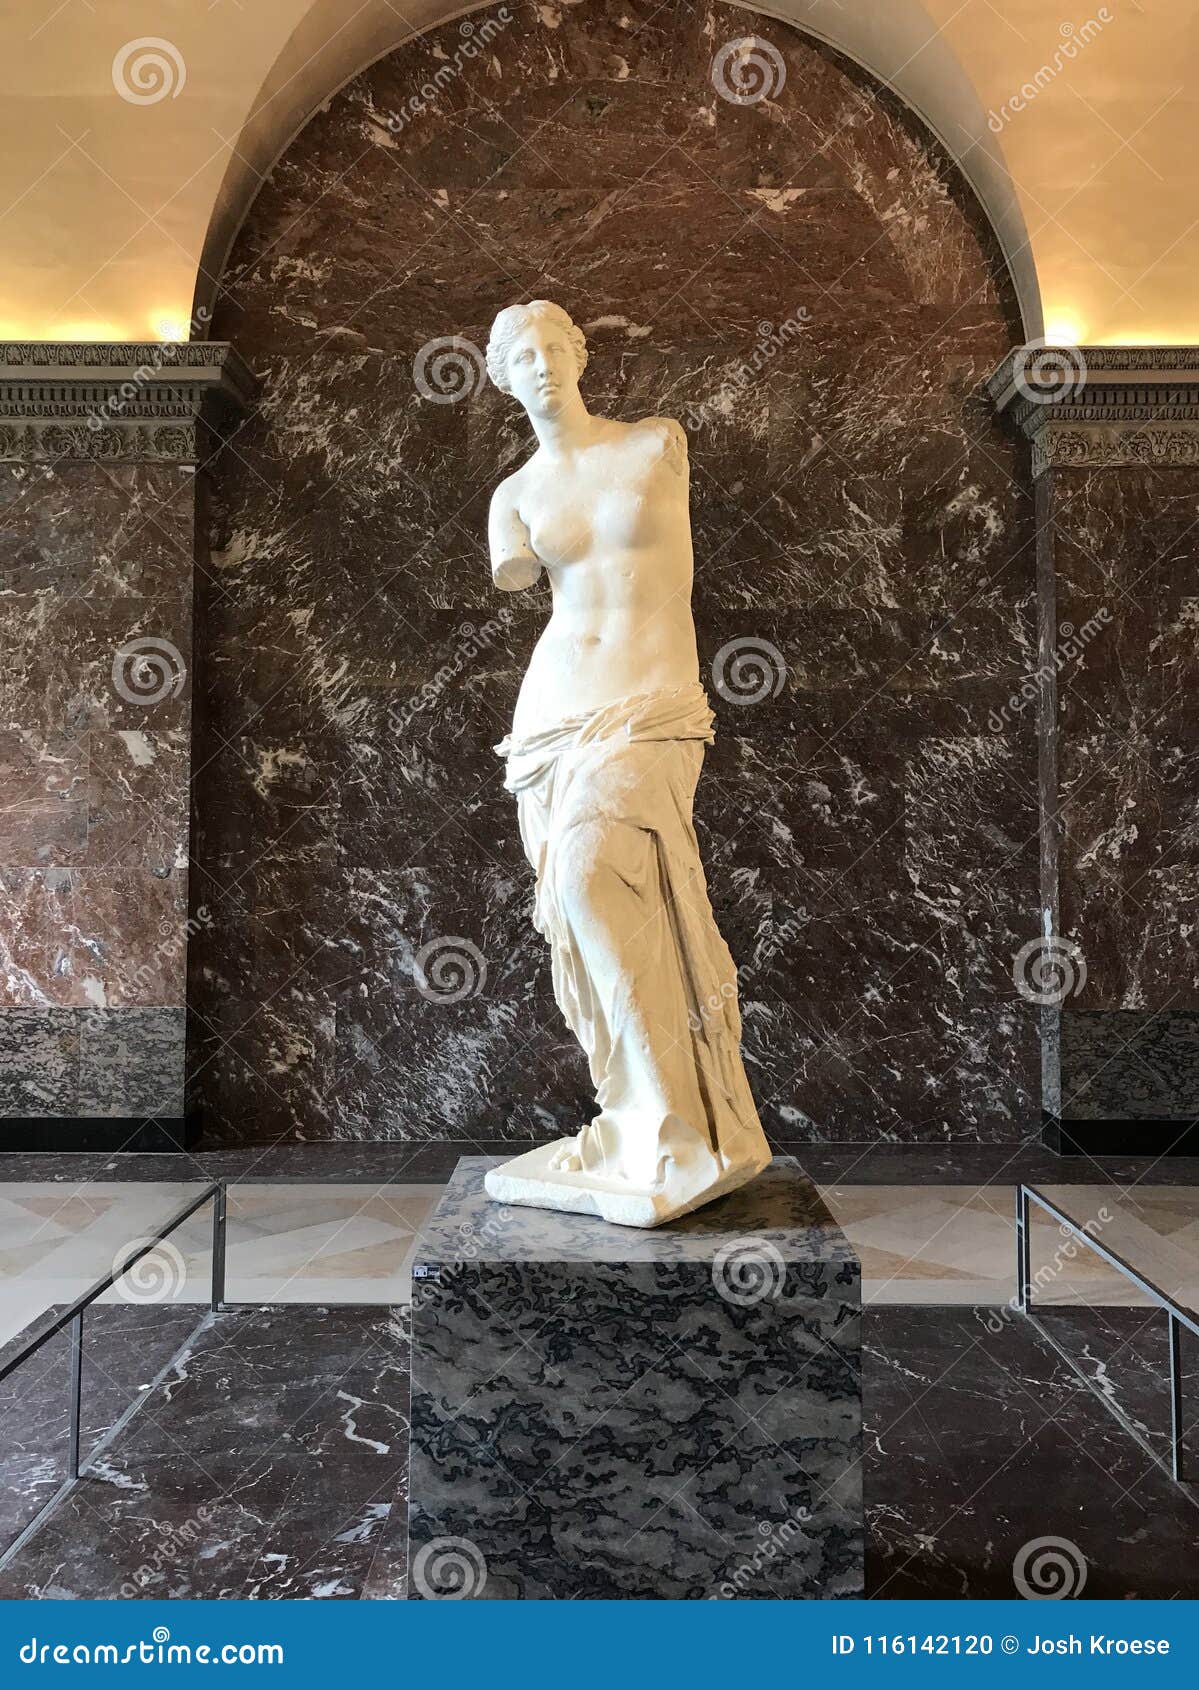 All 91+ Images venus de milo is also known as Full HD, 2k, 4k